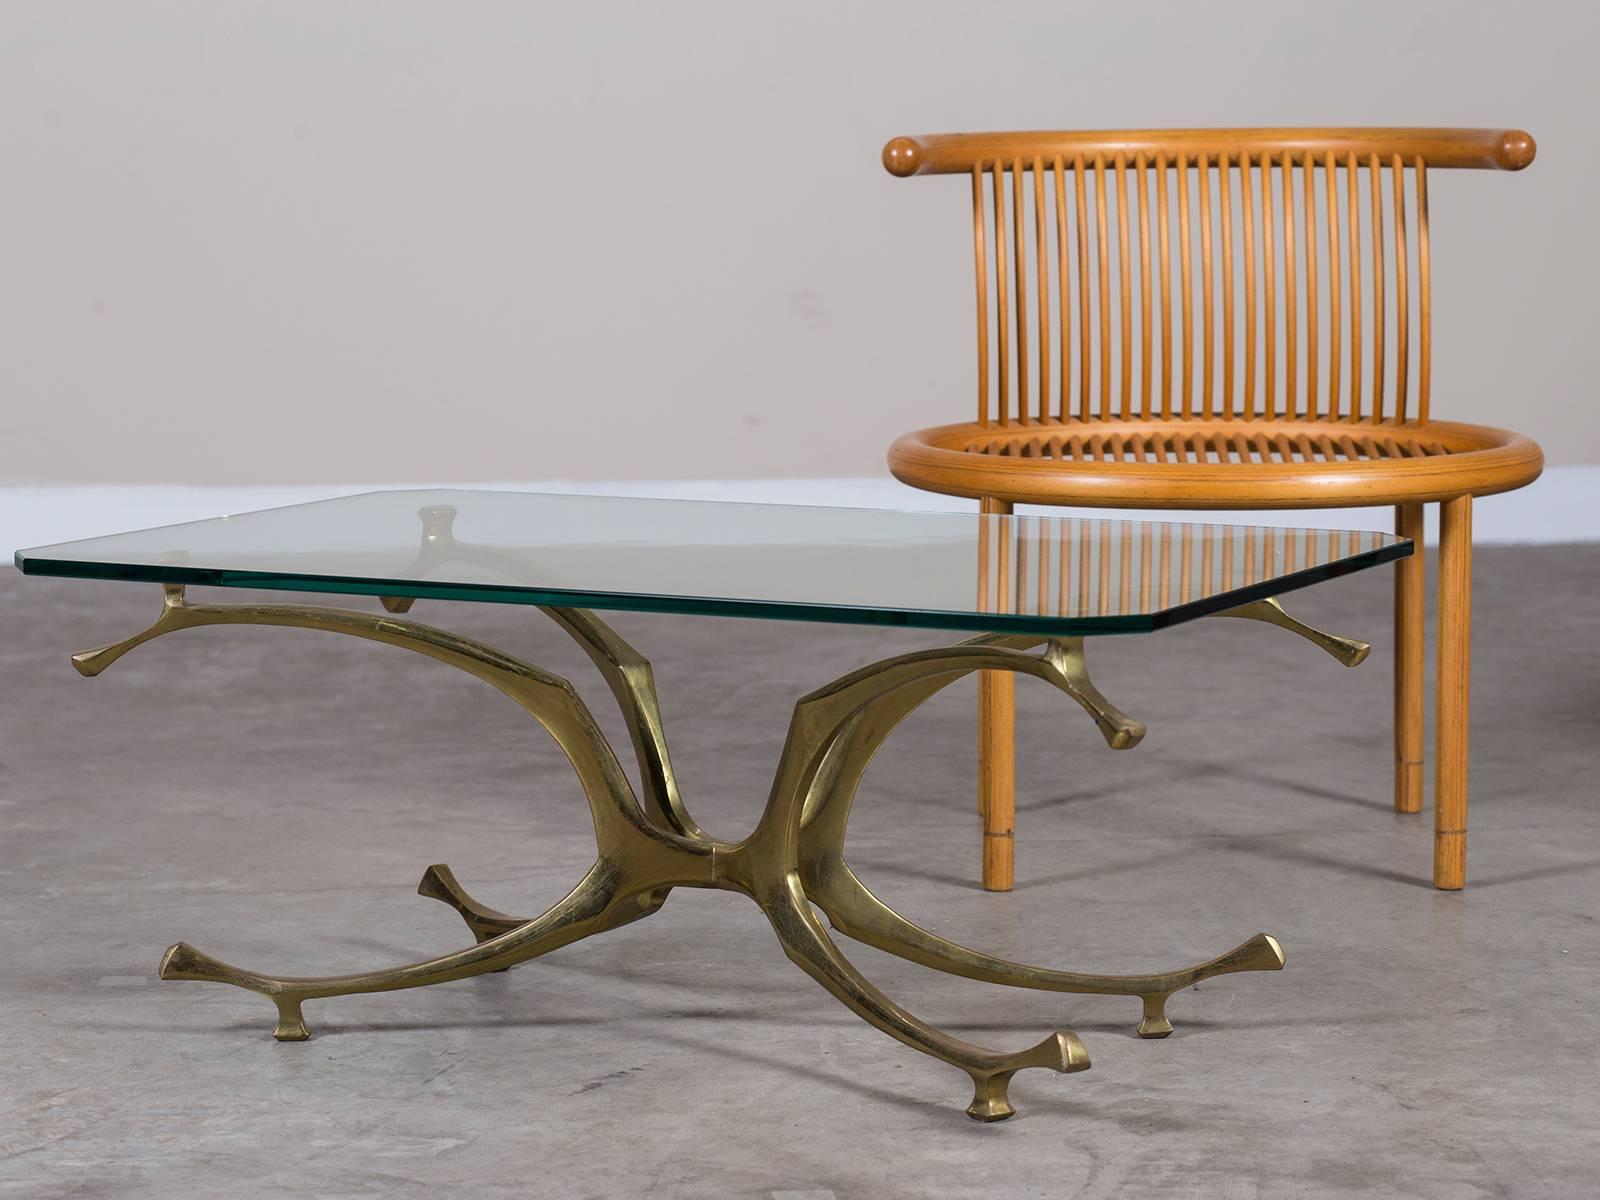 Receive our new selections direct from 1stdibs by email each week. Please click follow dealer below and see them first!

The striking organic design of this vintage French brass coffee table, circa 1970 is reminiscent of the original designs